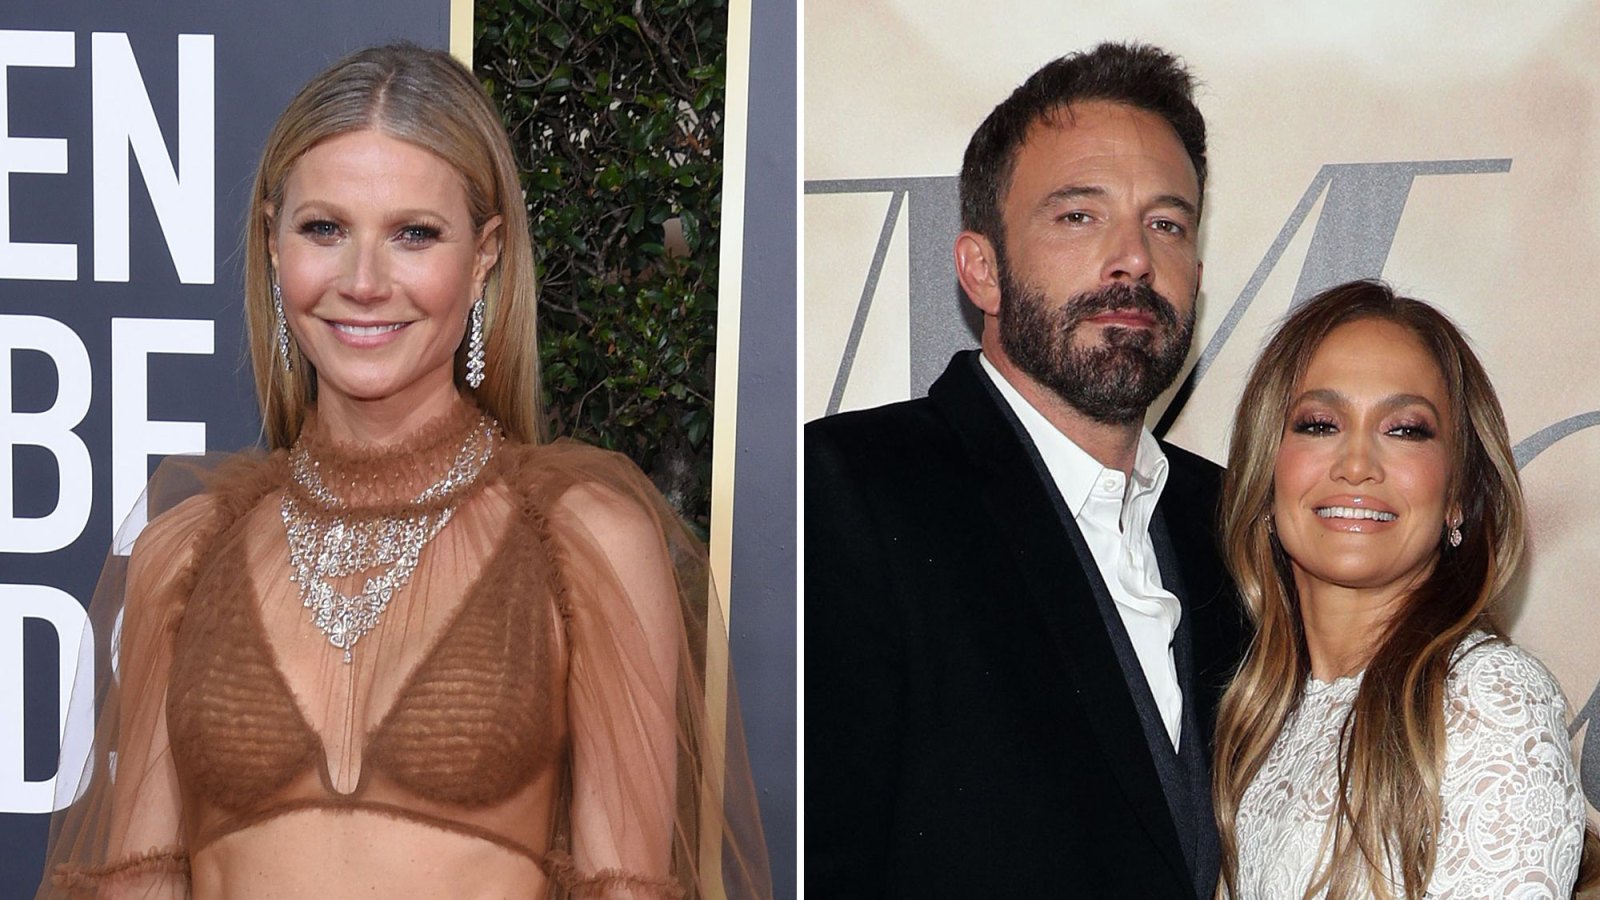 Gwyneth Paltrow Is Very Happy for Ex Ben Affleck After His Wedding to Jennifer Lopez